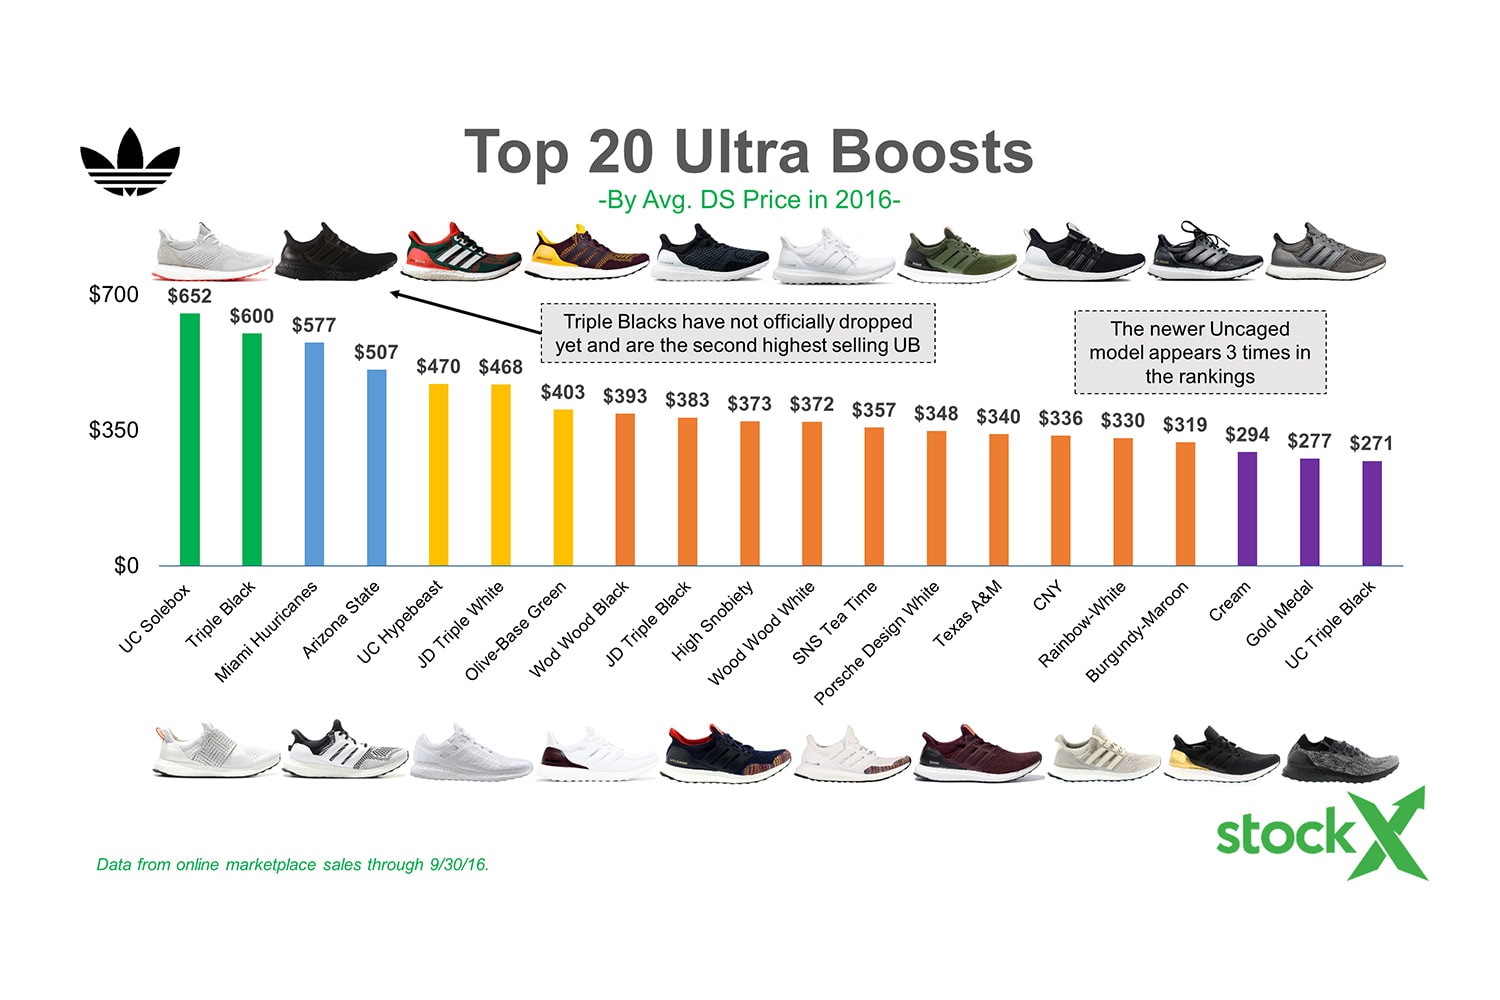 adidas's Stock & Resell Value Has Risen over the Years NMDs UltraBOOST Nike Kanye West Pharrell